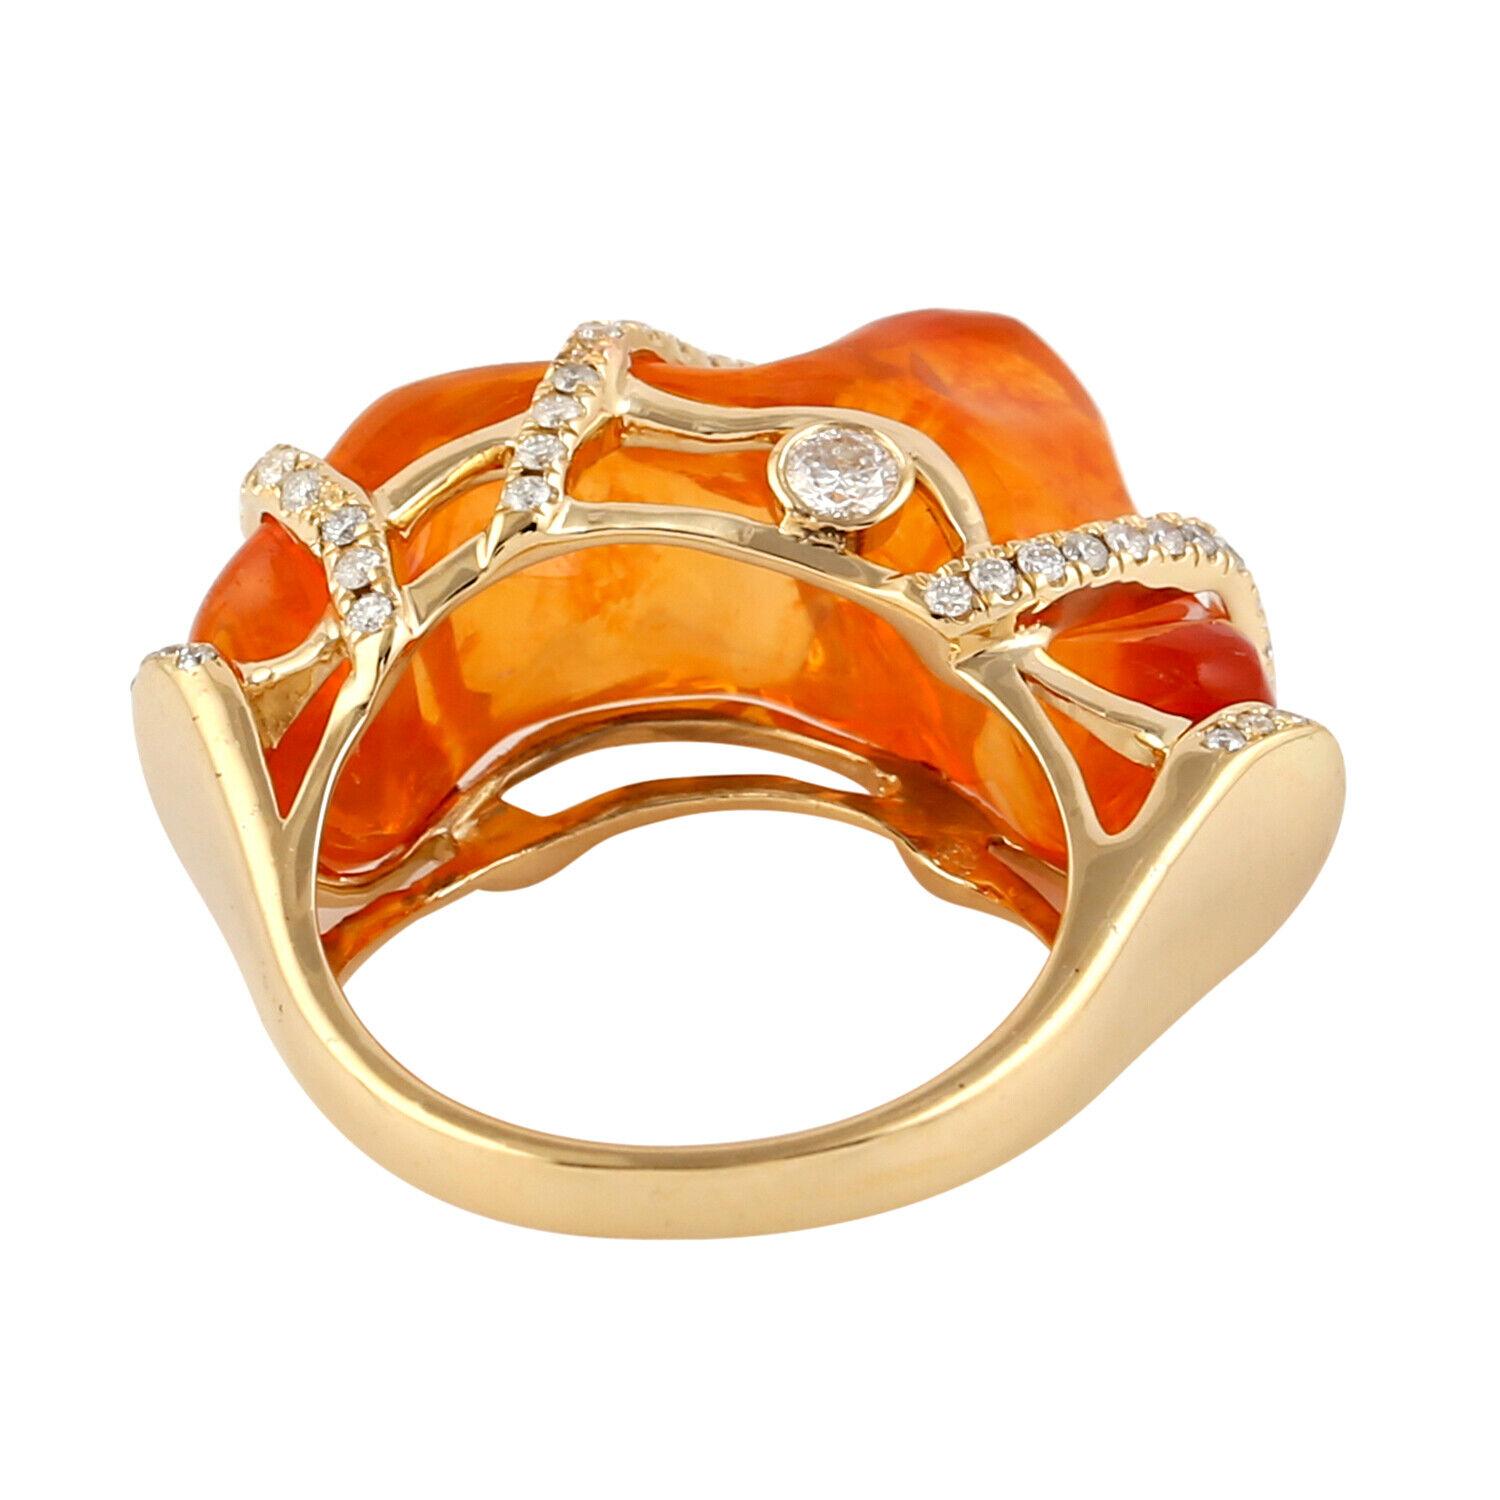 This ring has been meticulously crafted from 18-karat gold, 14.19 carat fire opal and handset with .55 carats of sparkling diamonds. This is a one-of-a-kind ring.  

The ring is a size 7 and may be resized to larger or smaller upon request. 
FOLLOW 